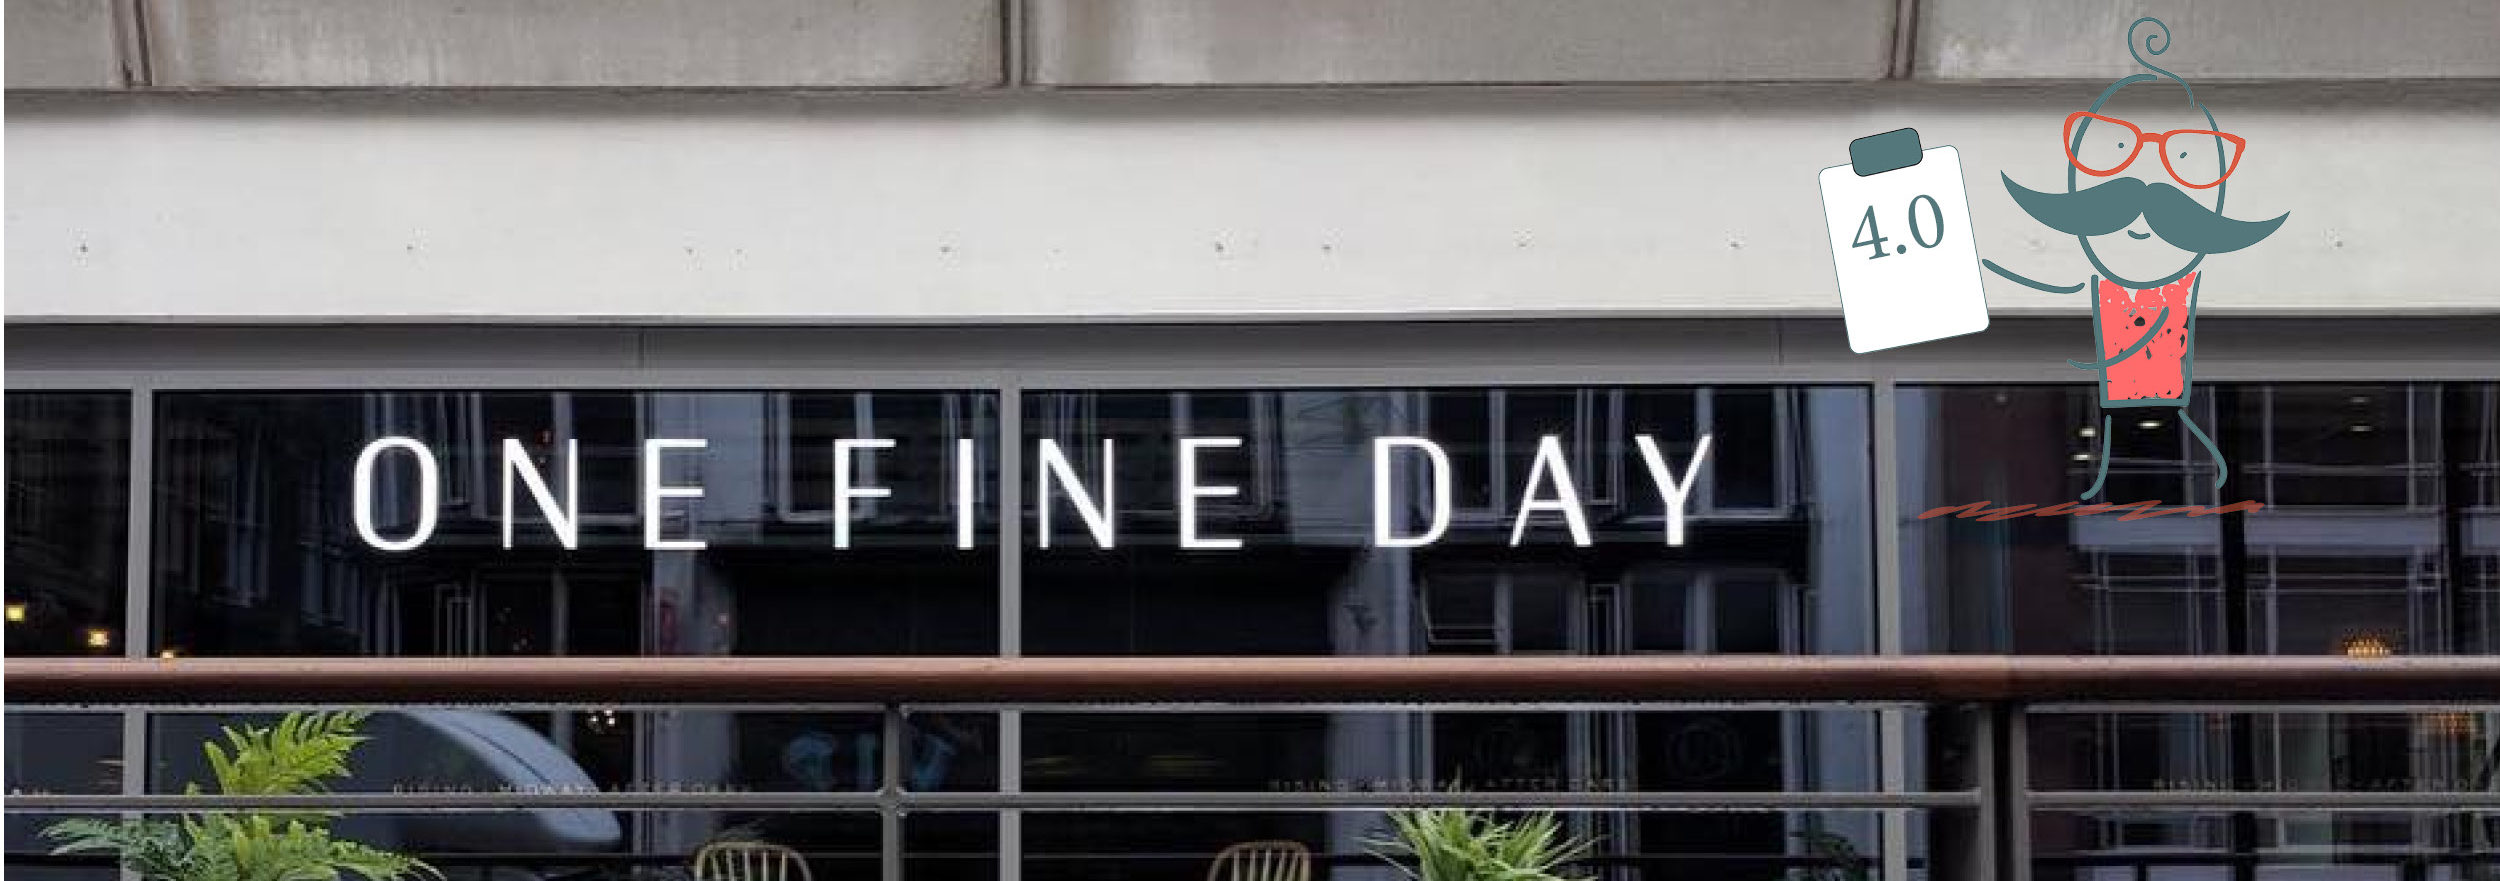 Faulty Review – One Fine Day,  Liverpool